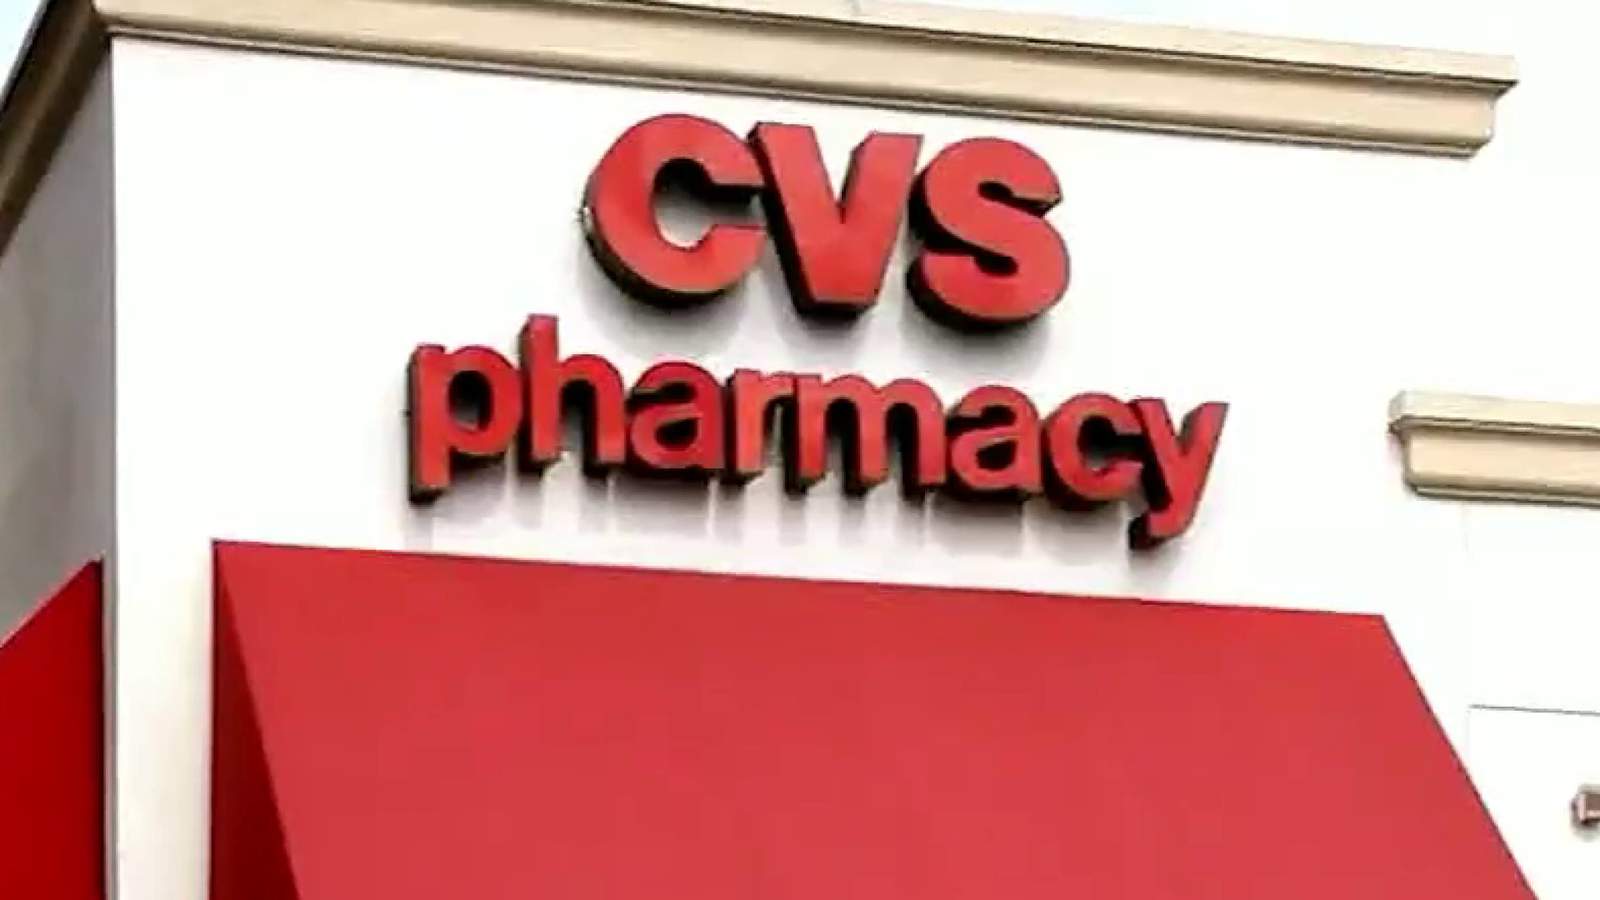 UPDATE: All Florida teachers, child care workers can now get COVID-19 vaccine at these pharmacies